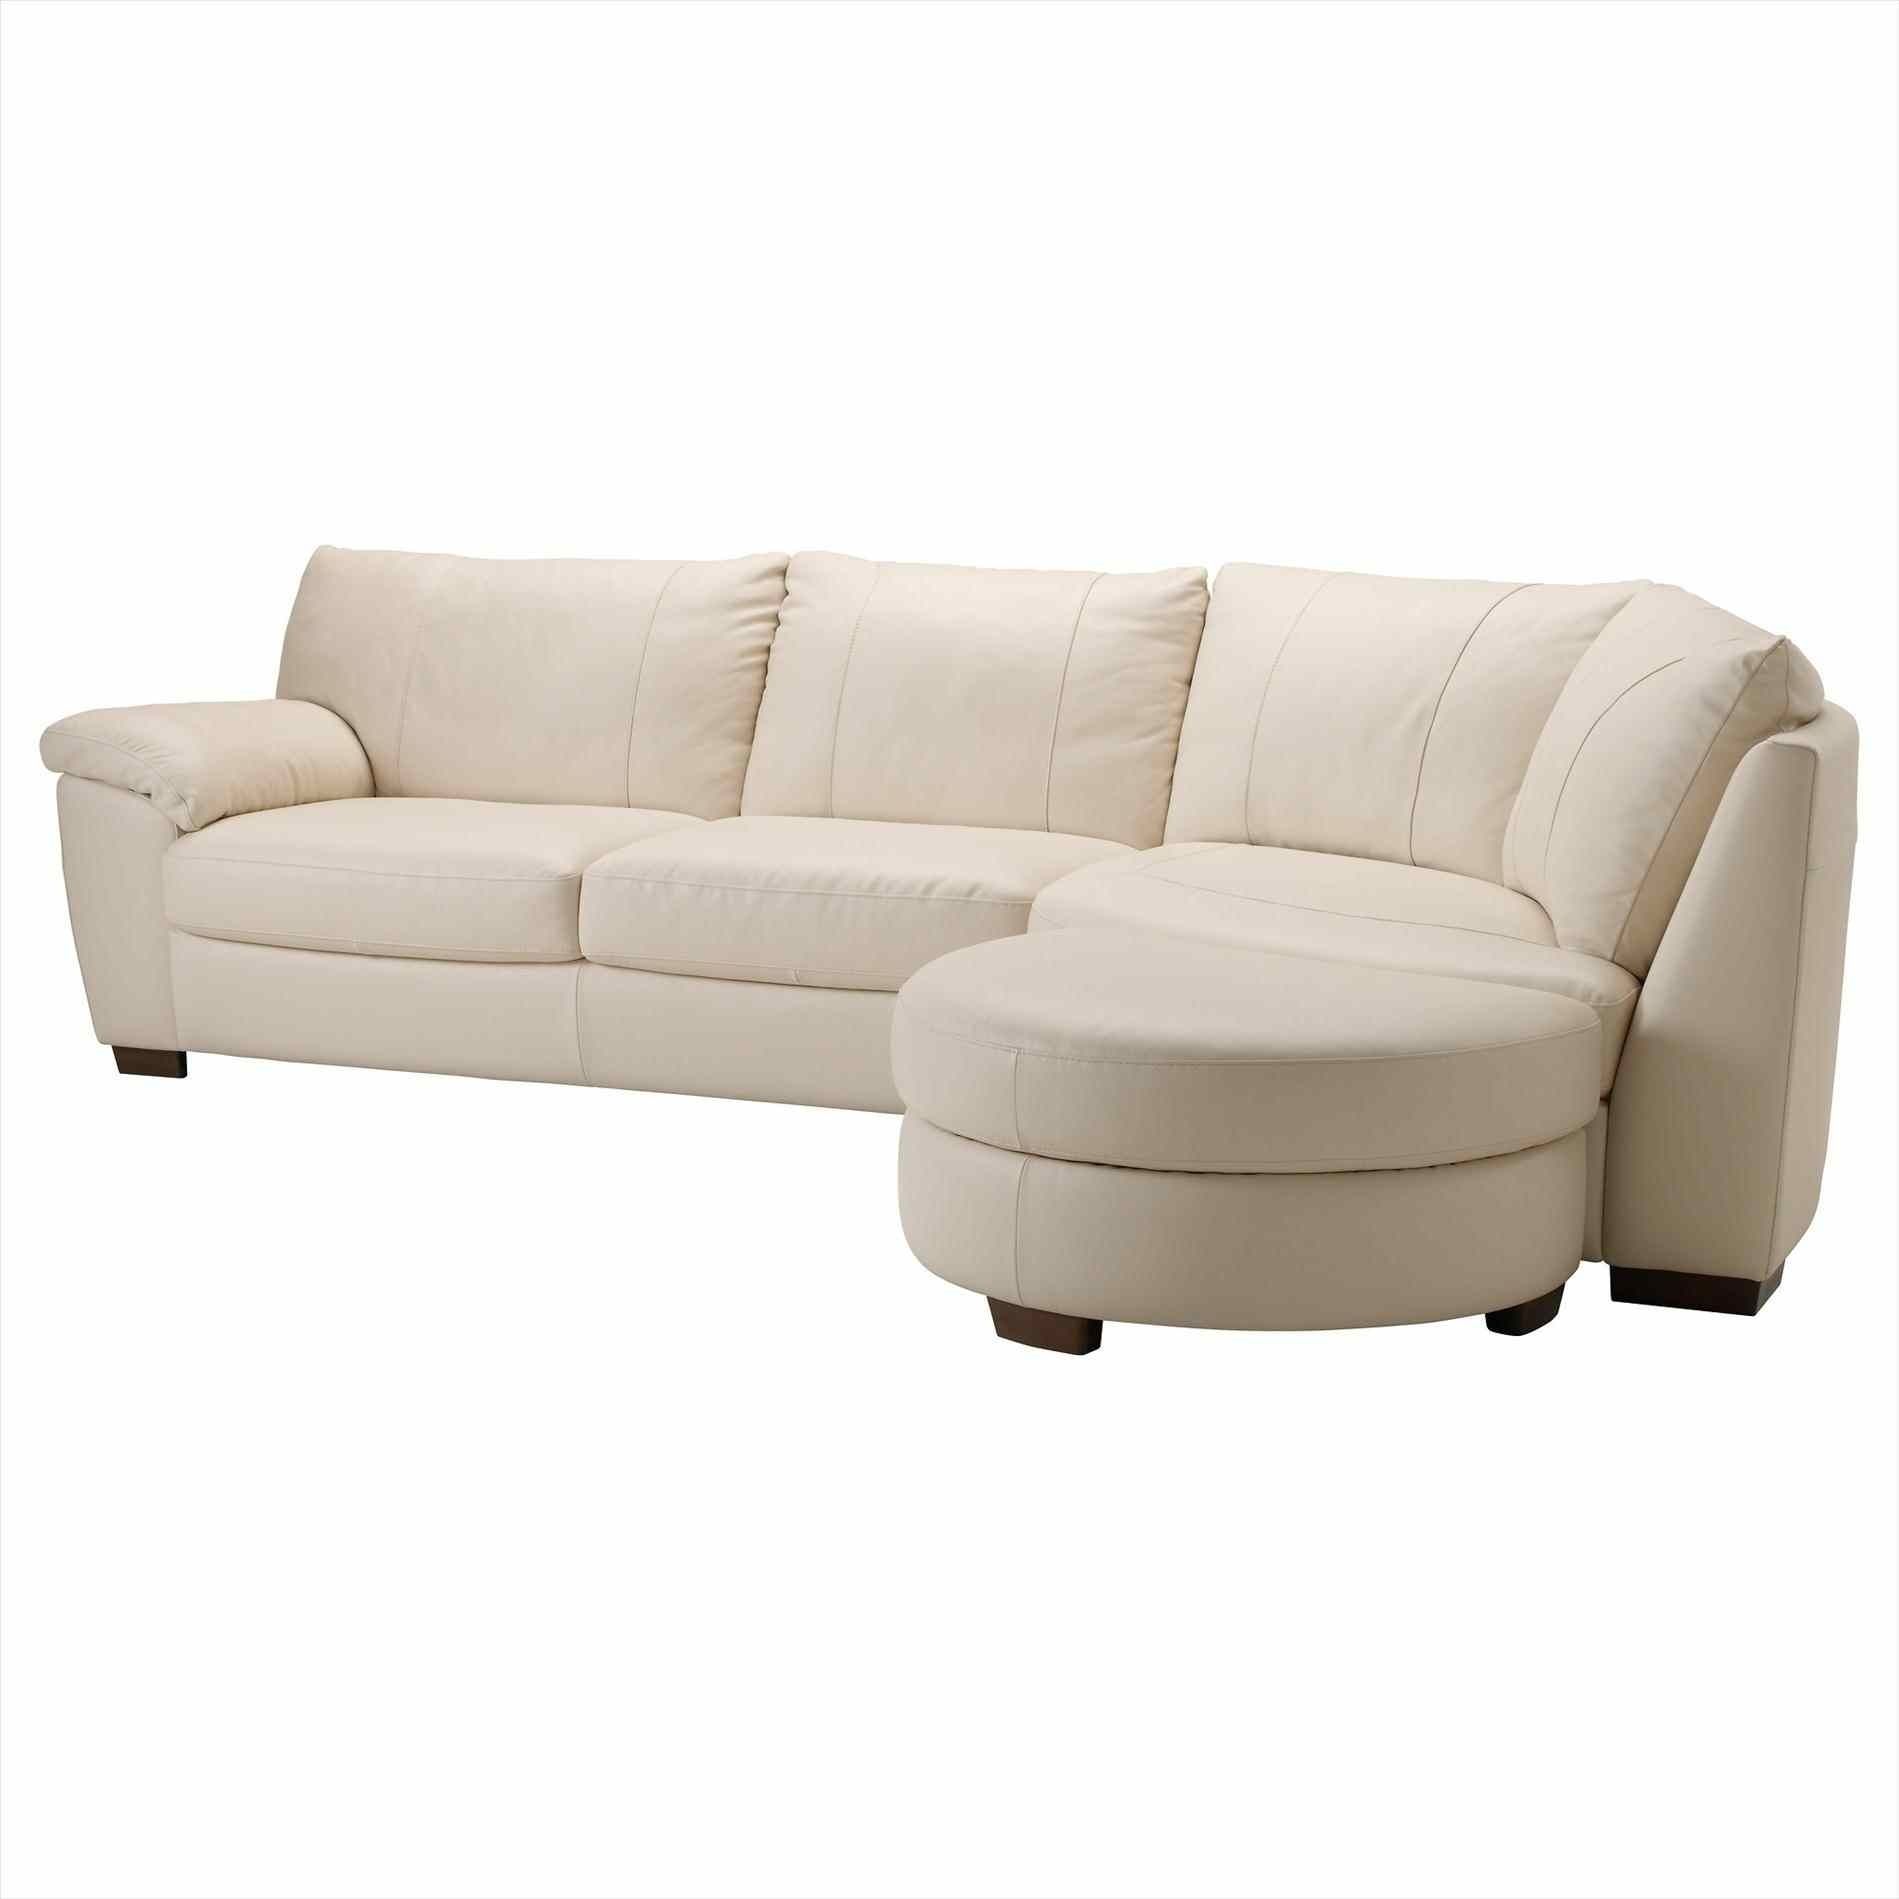 Couch : Cm Furniture Round Corner Couch Small Sofa Cm Fabric For Rounded Corner Sectional Sofas (Photo 9 of 10)